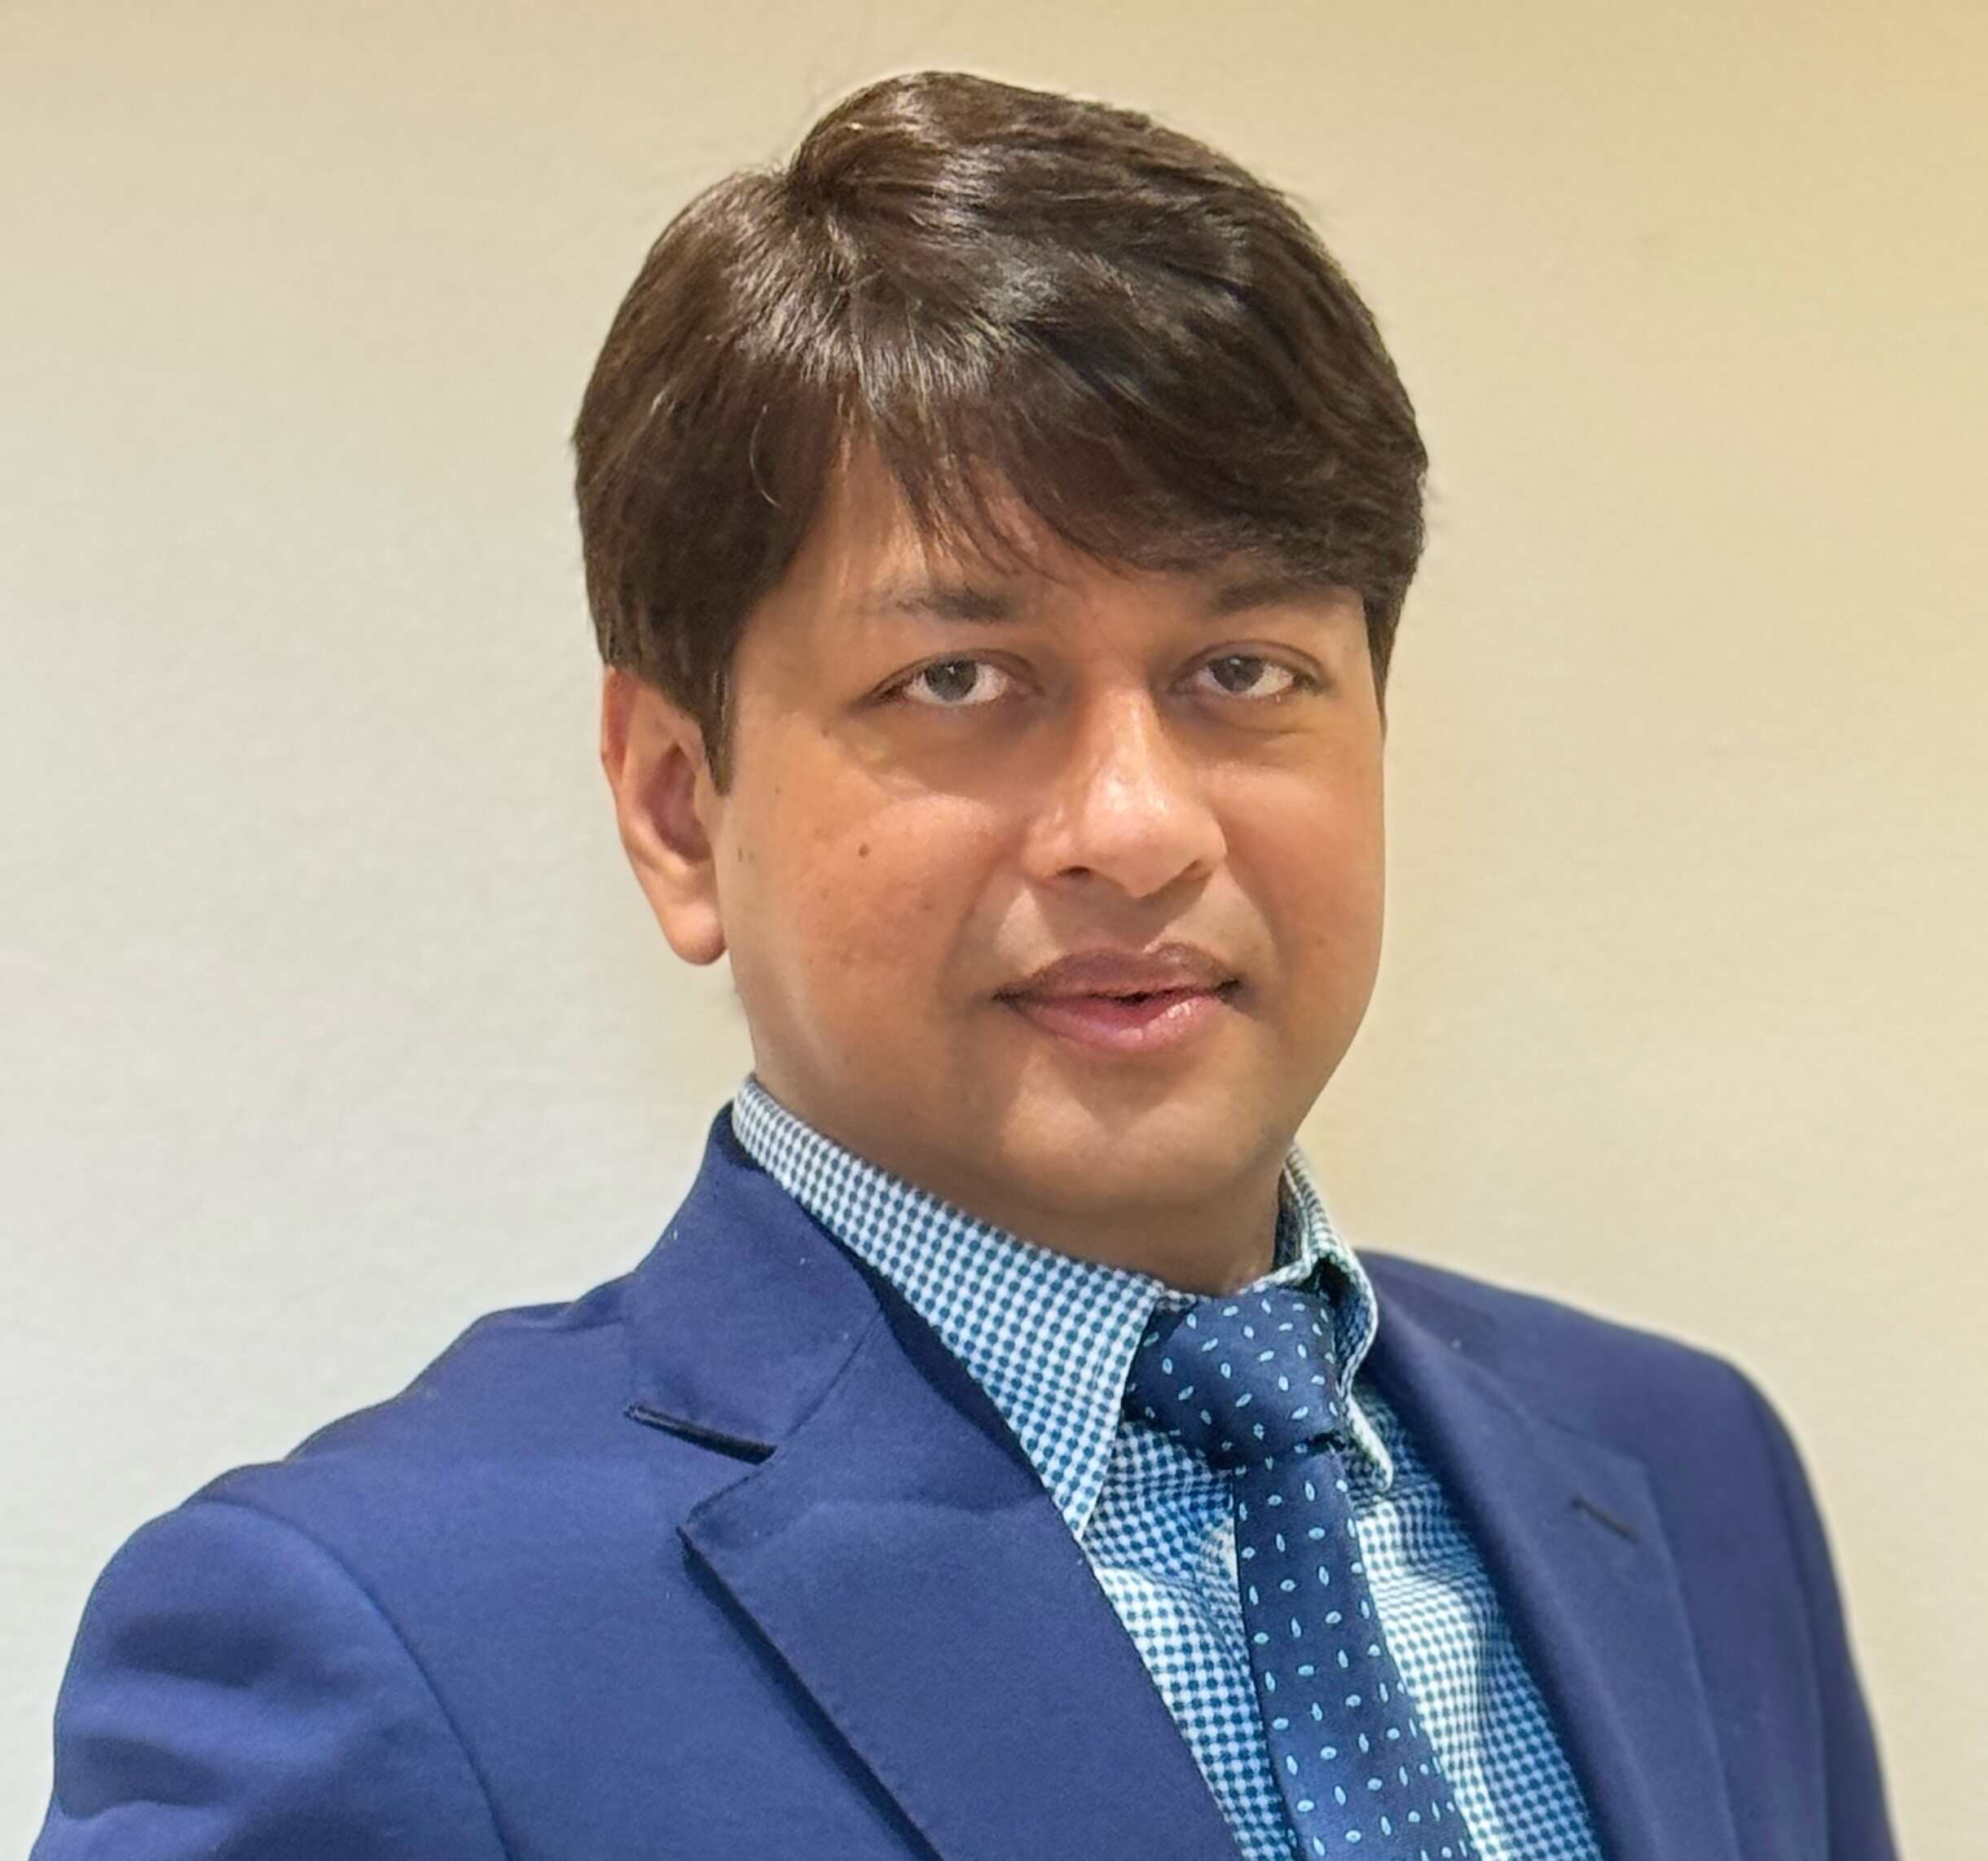 Mr Ghosh, Laser Eye Surgeon, Cataract and Refractive Surgeon at My Eye Clinic. He specialises in Laser Eye Surgery and Cataract Surgery with Toric or Multifocal Lenses.